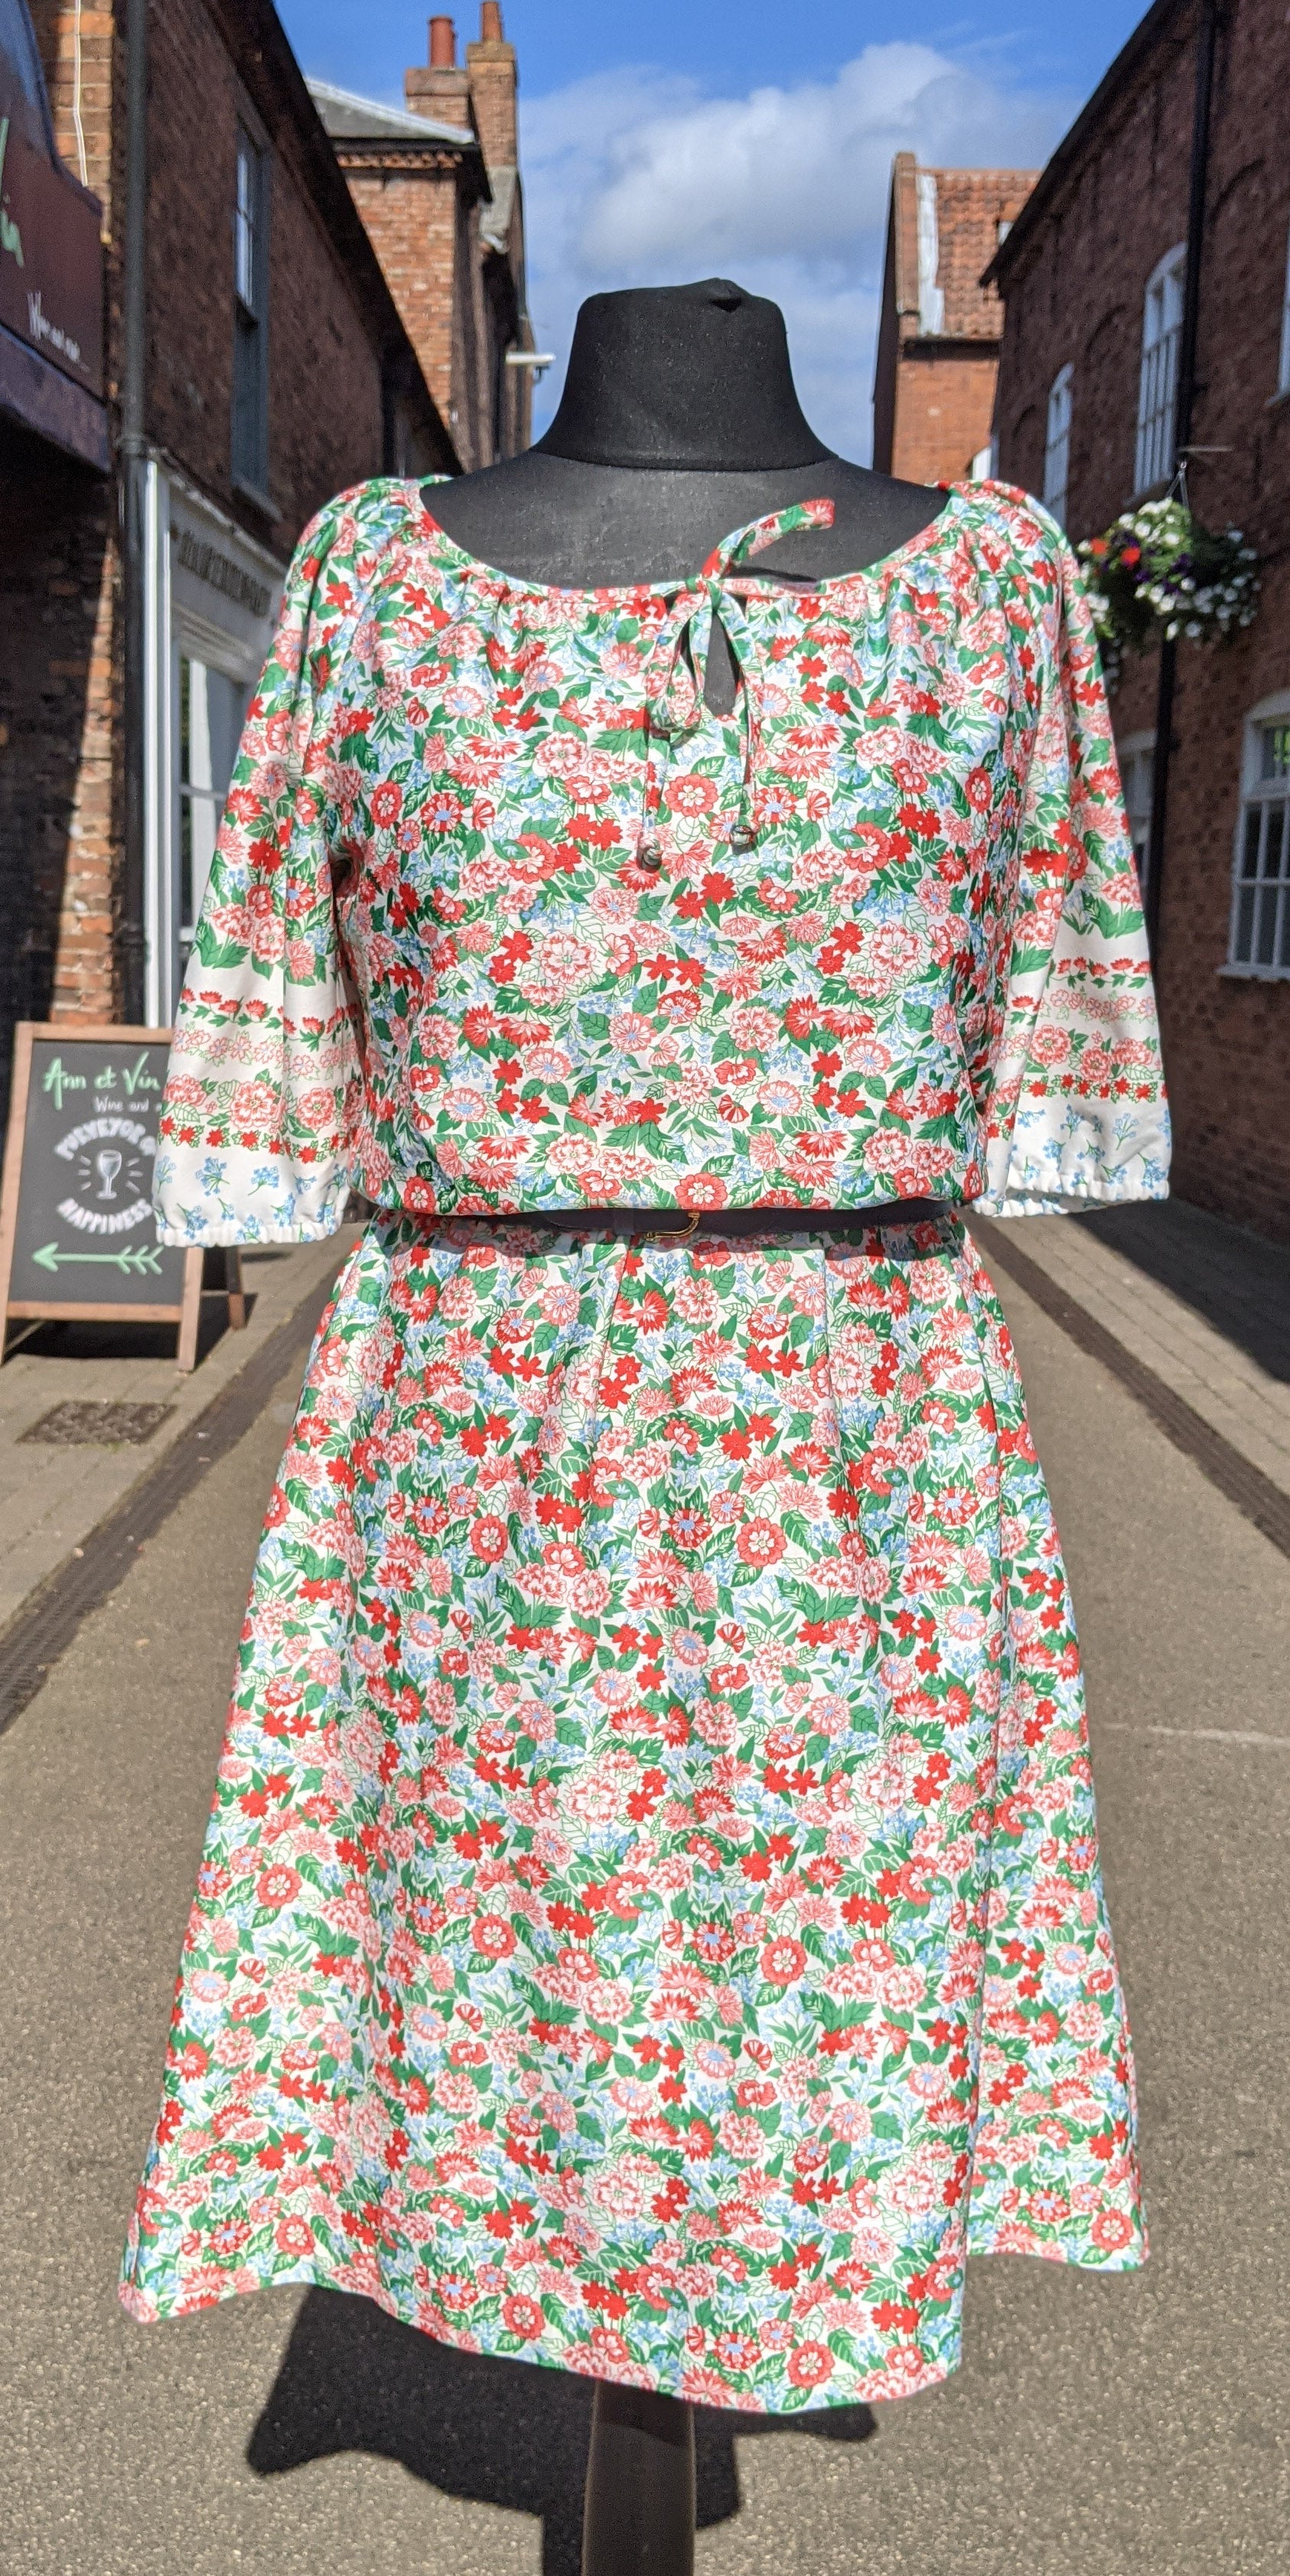 Floral poly dress approx size 14 item A214